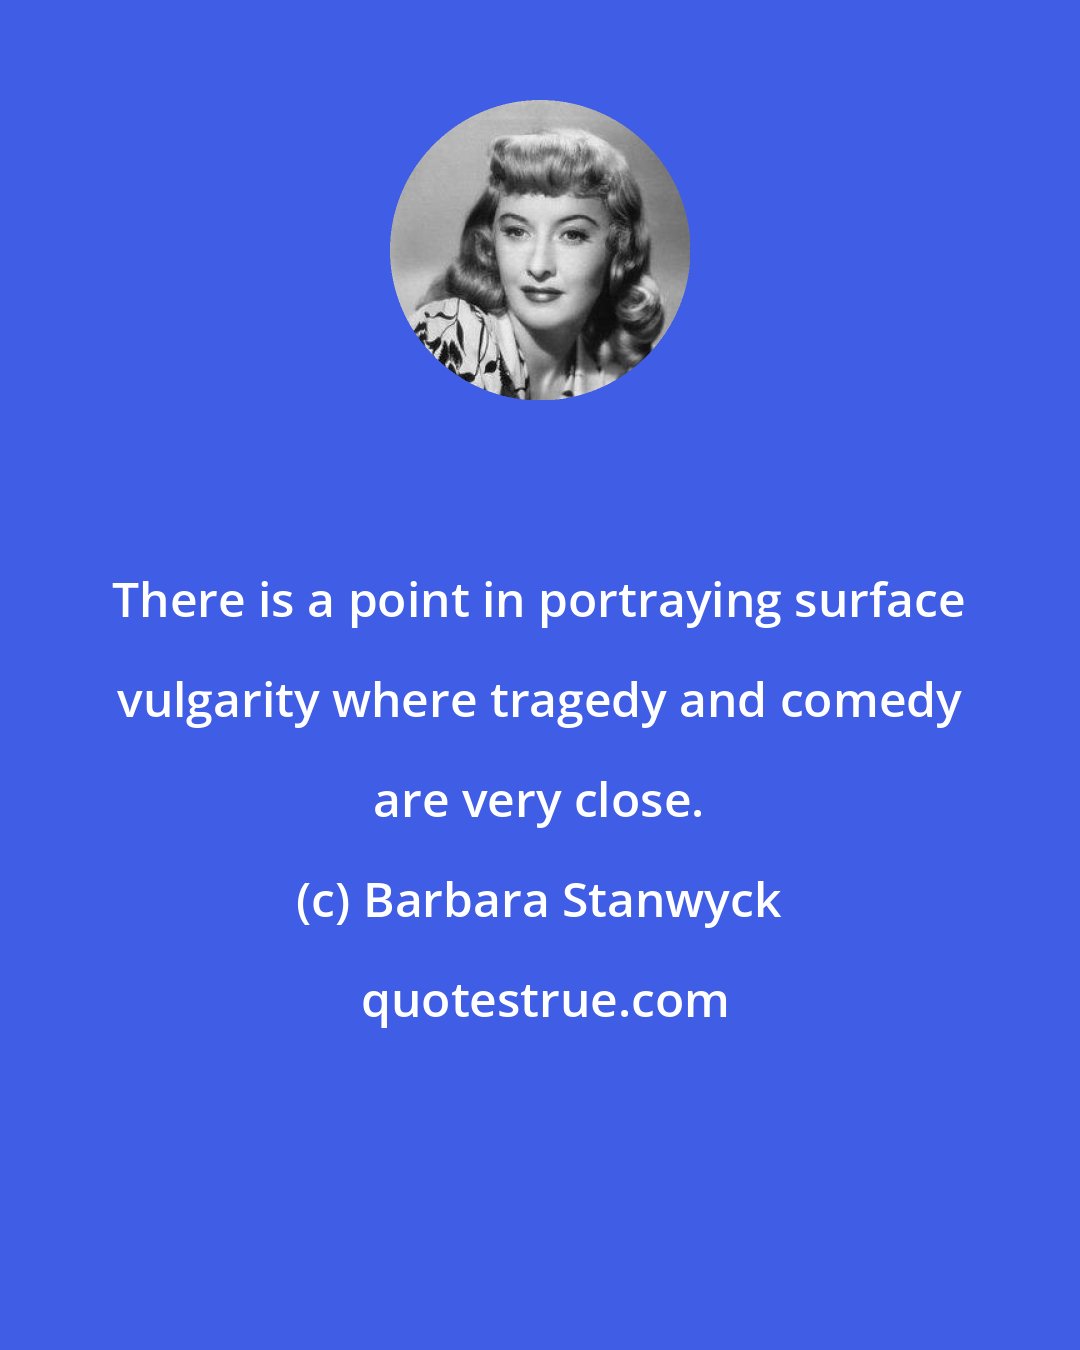 Barbara Stanwyck: There is a point in portraying surface vulgarity where tragedy and comedy are very close.